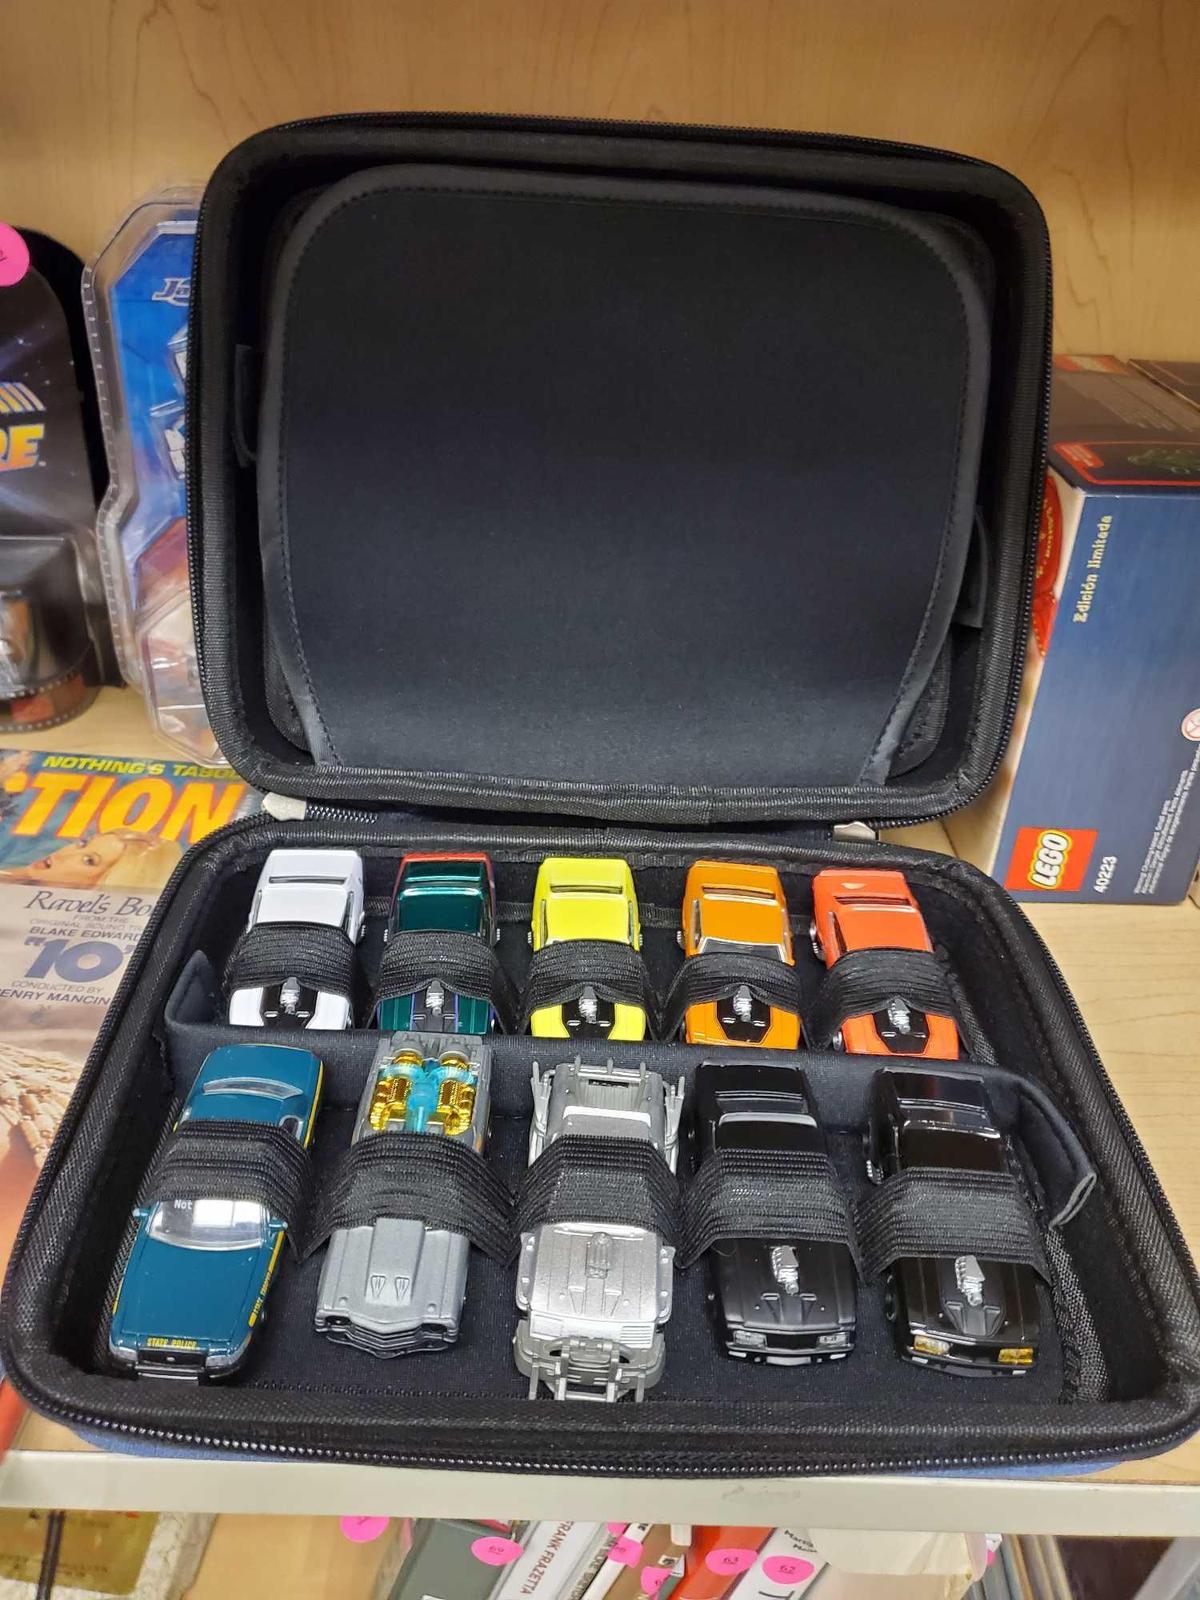 SOFT ZIP CASE FILLED WITH MISC DIECAST CAR MODELS, MUSCLE CARS, AND 1 POLICE CAR, PLEASE SEE THE